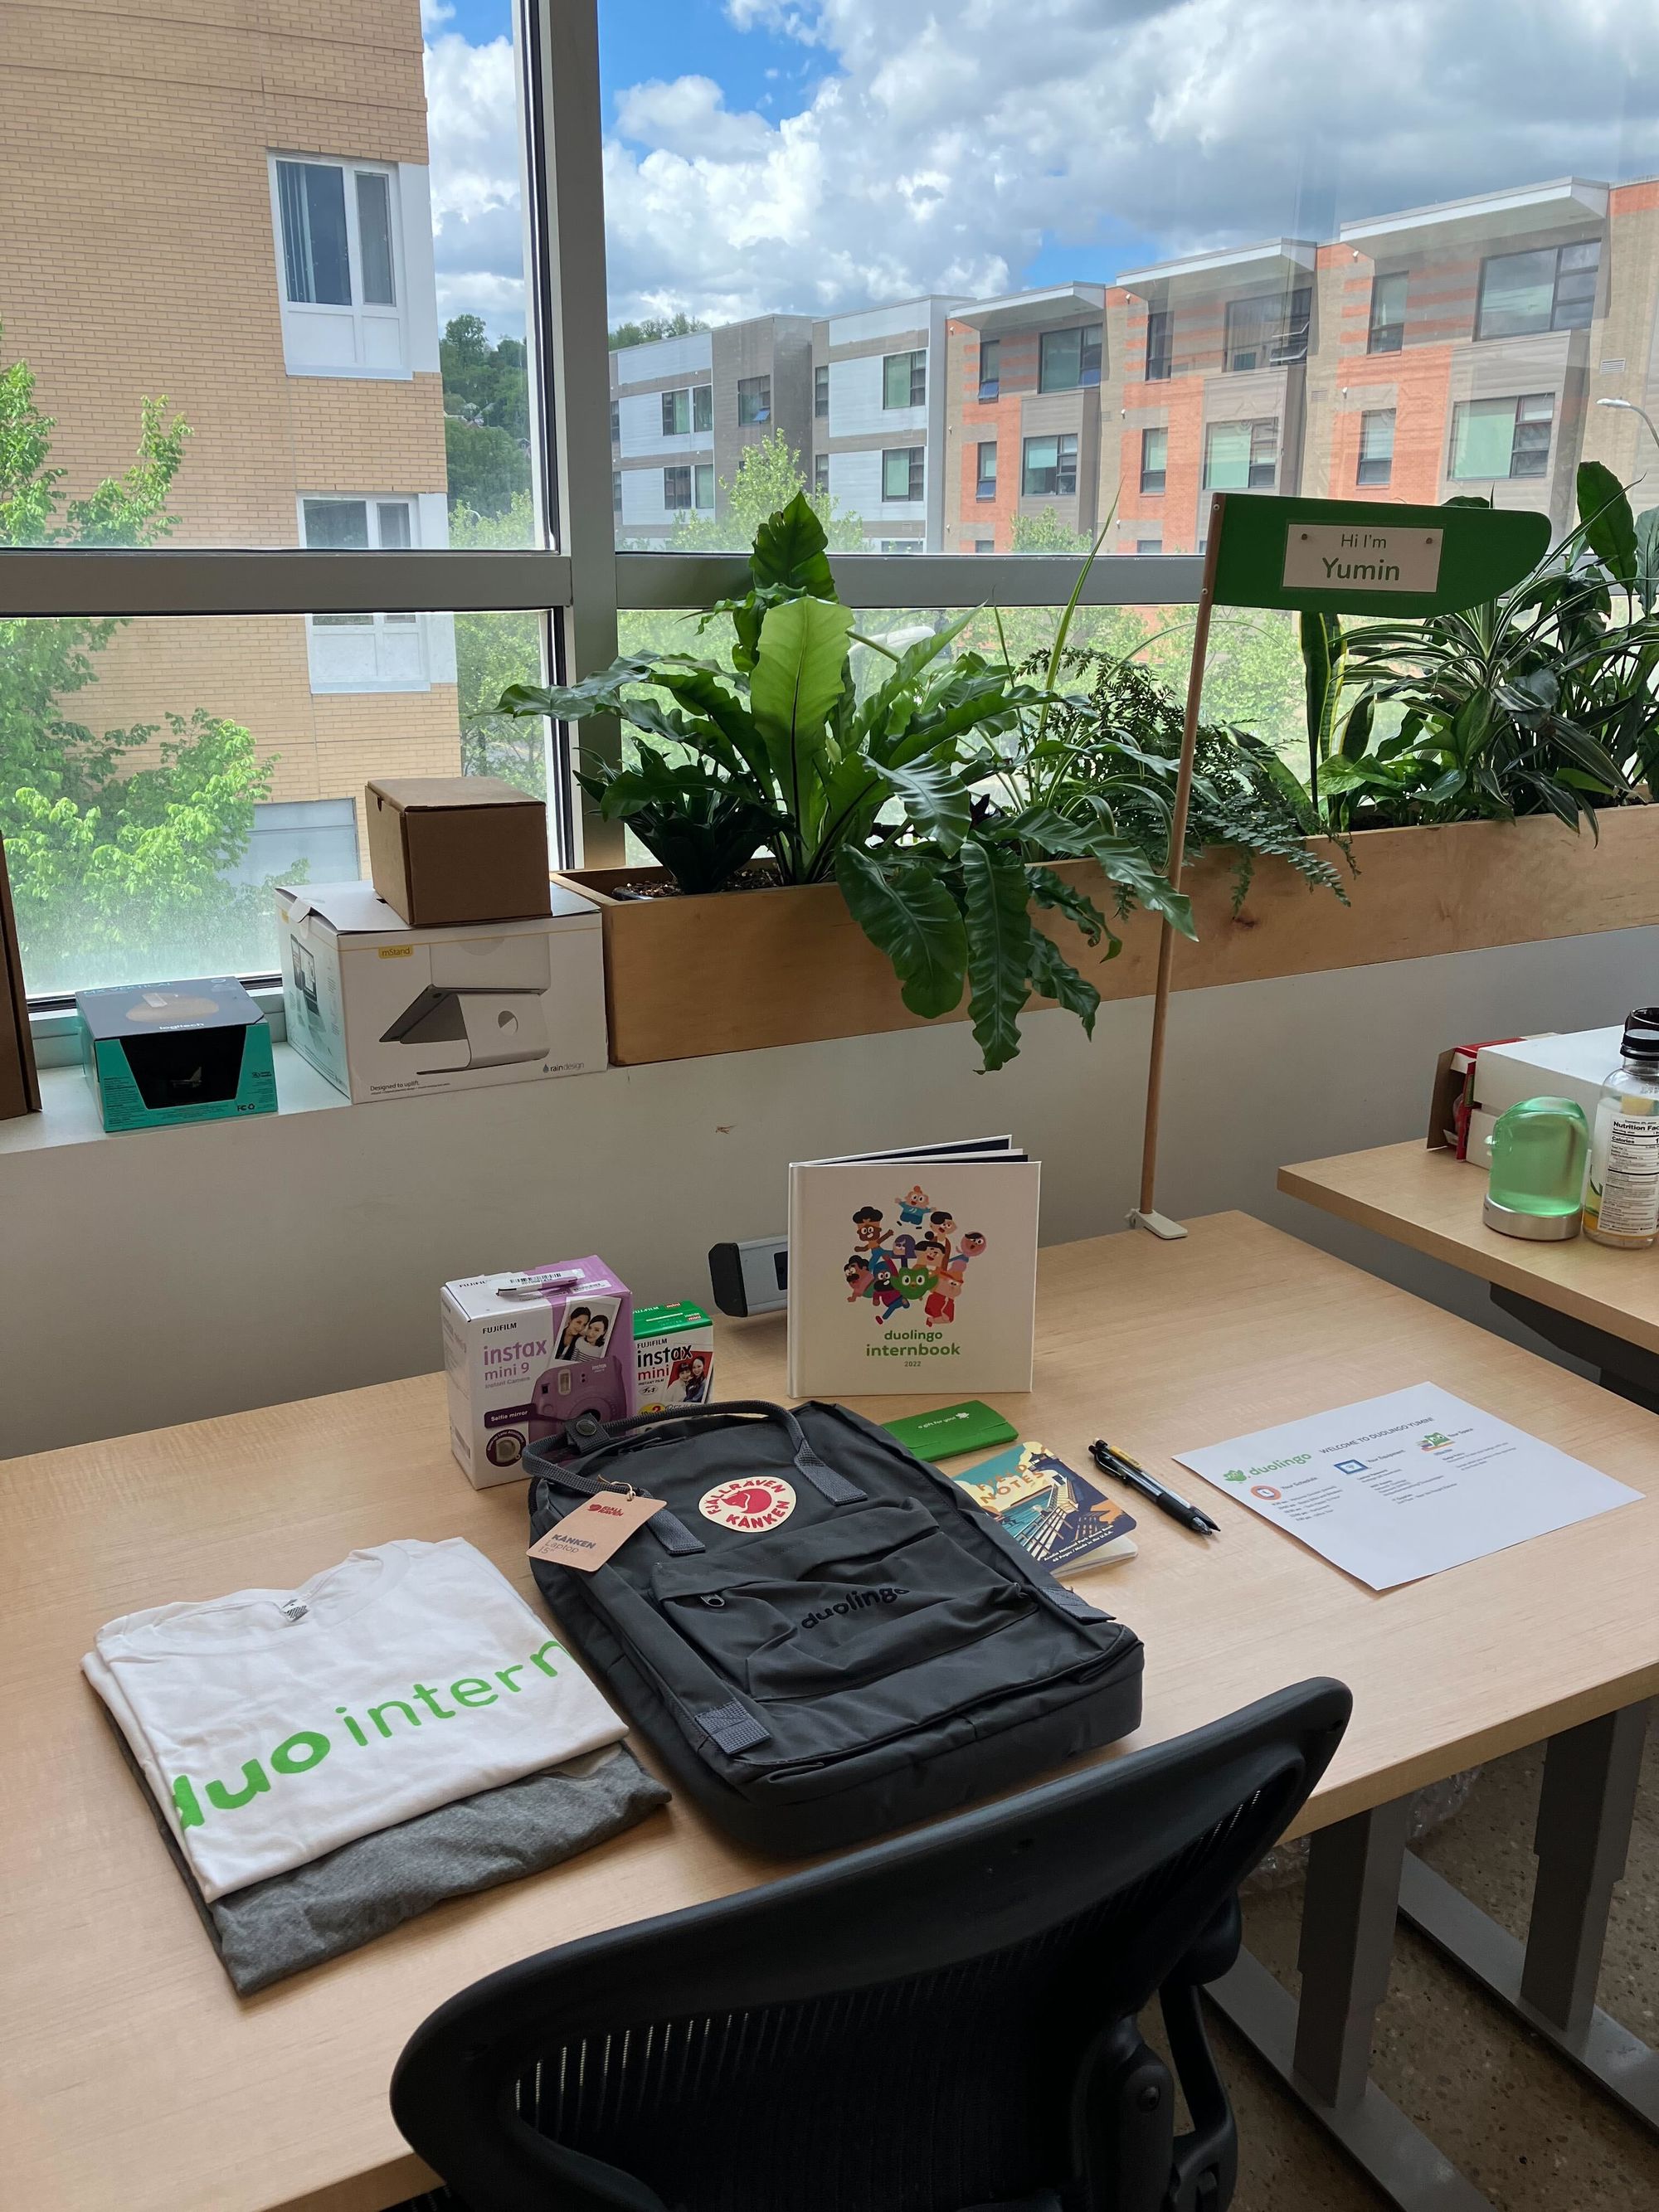 A sunny desk surrounded by plants, featuring a backpack, a t-shirt that says "duointern", a book, and a polaroid camera